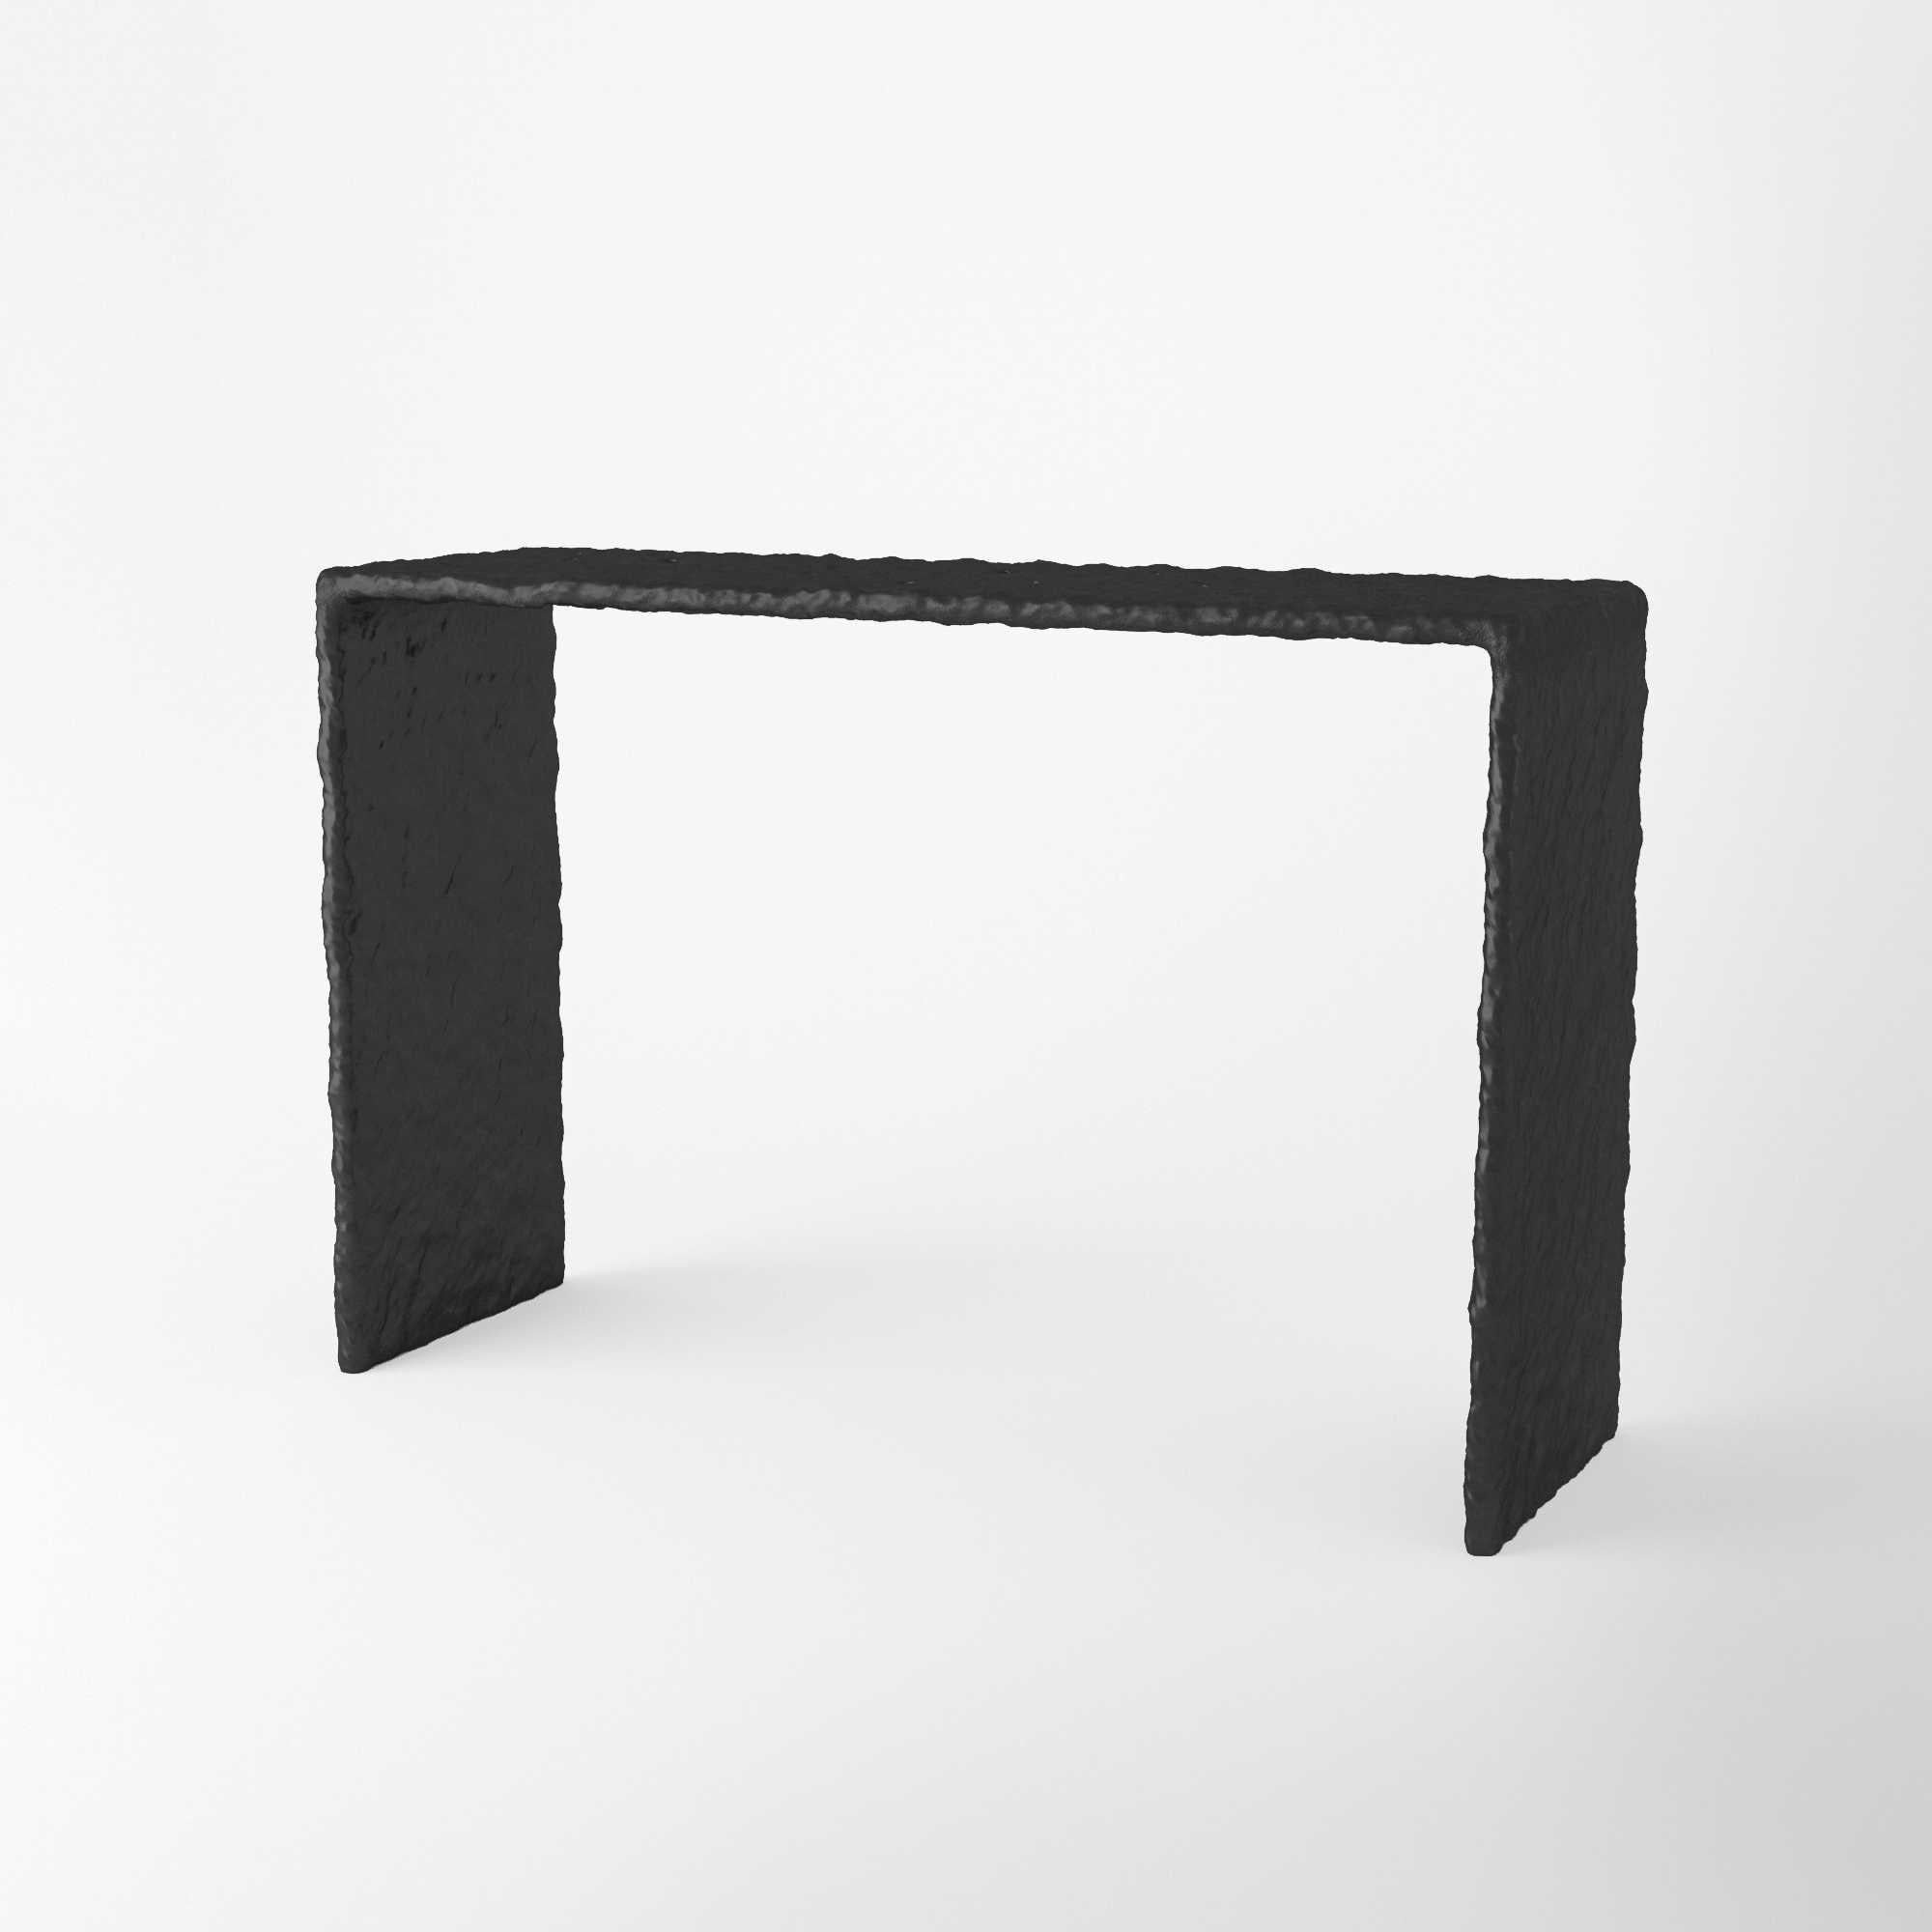 Sculpted contemporary Indoor console table by FAINA
Design: Victoriya Yakusha
Material: Steel, flax rubber, biopolymer and cellulose
Dimensions and weight
Length 120 x height 80 x width 40 cm.
Weight: 20 kilos

Outdoor version available, please